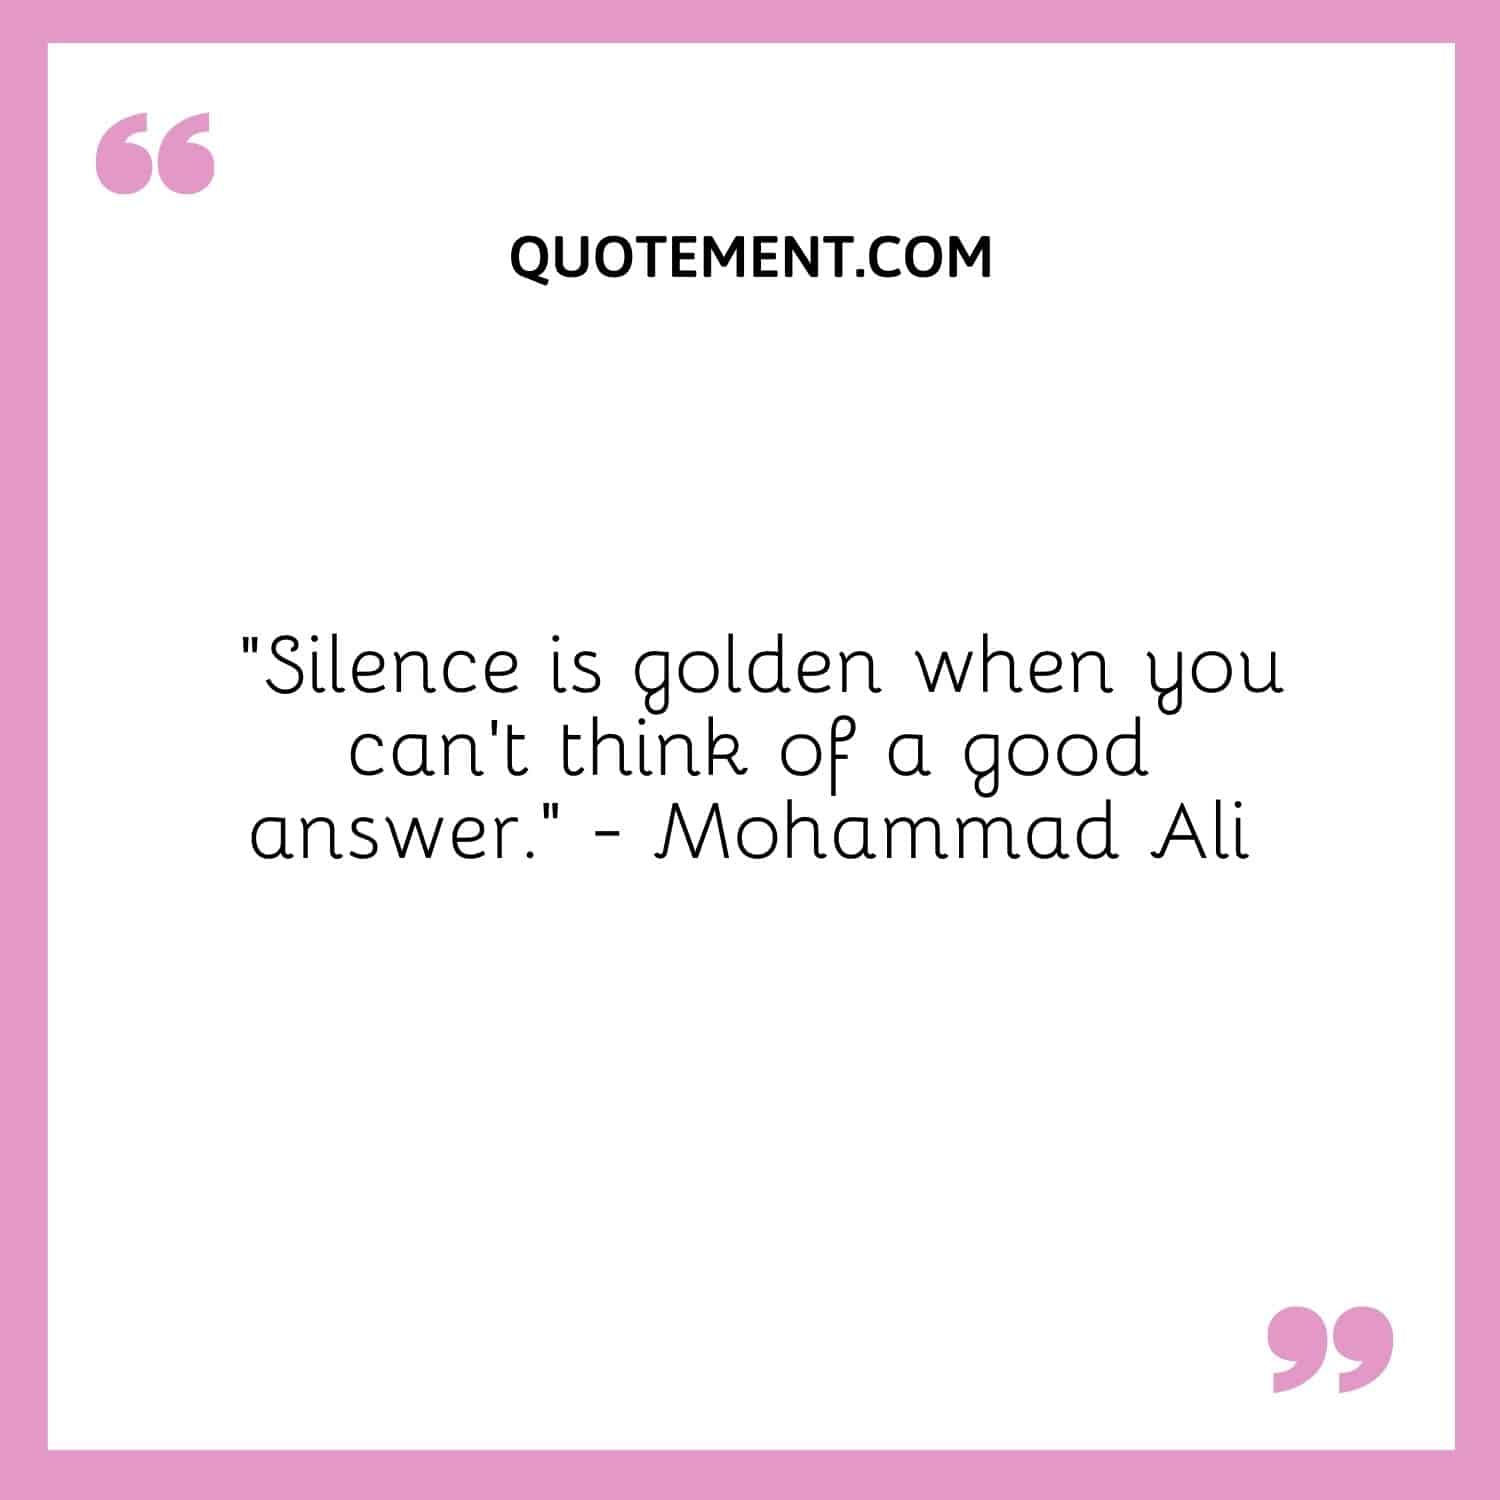 “Silence is golden when you can’t think of a good answer.” — Mohammad Ali